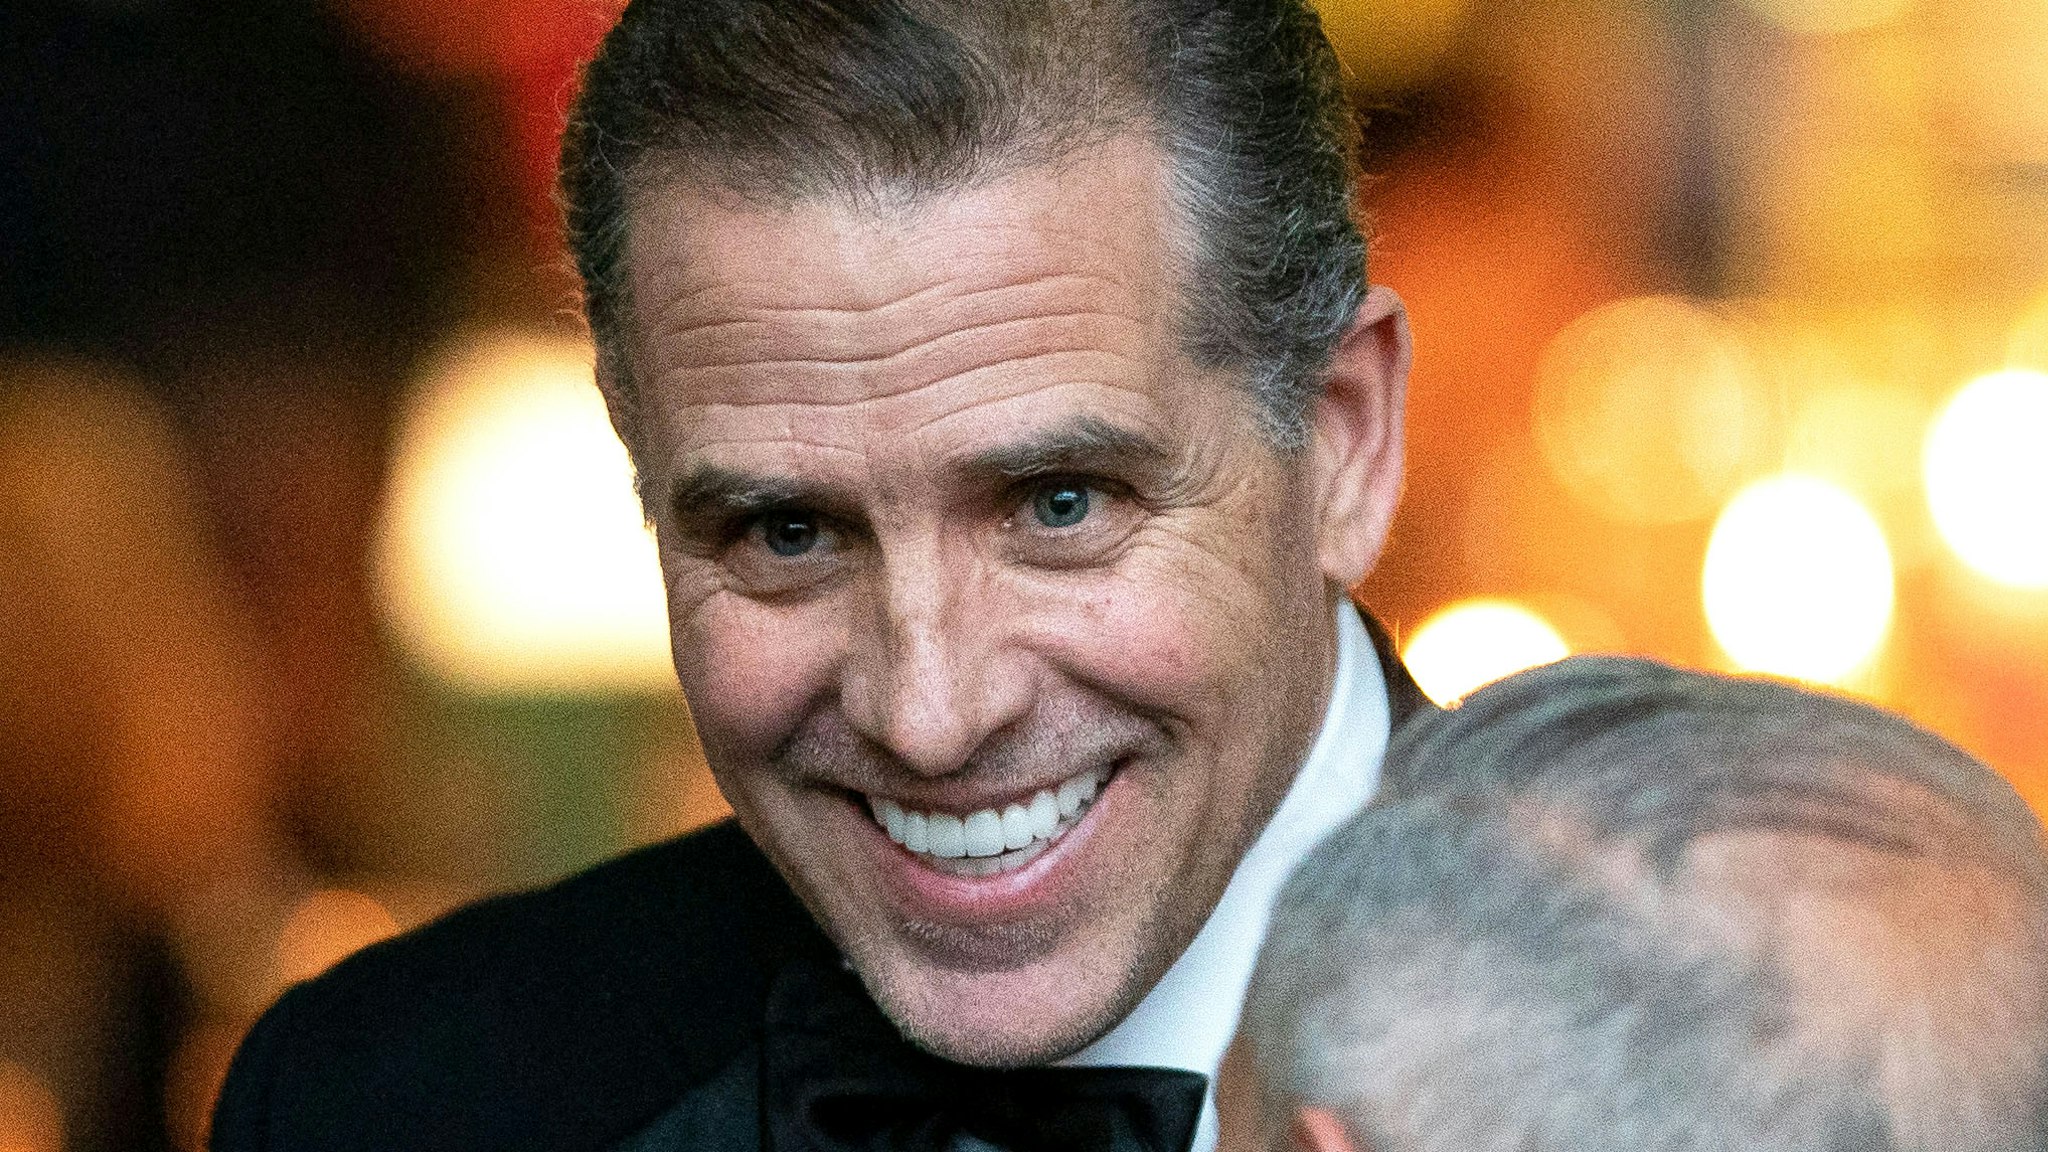 Hunter Biden arrives for a toast during an official State Dinner in honor of India's Prime Minister Narendra Modi, at the White House in Washington, DC, on June 22, 2023.